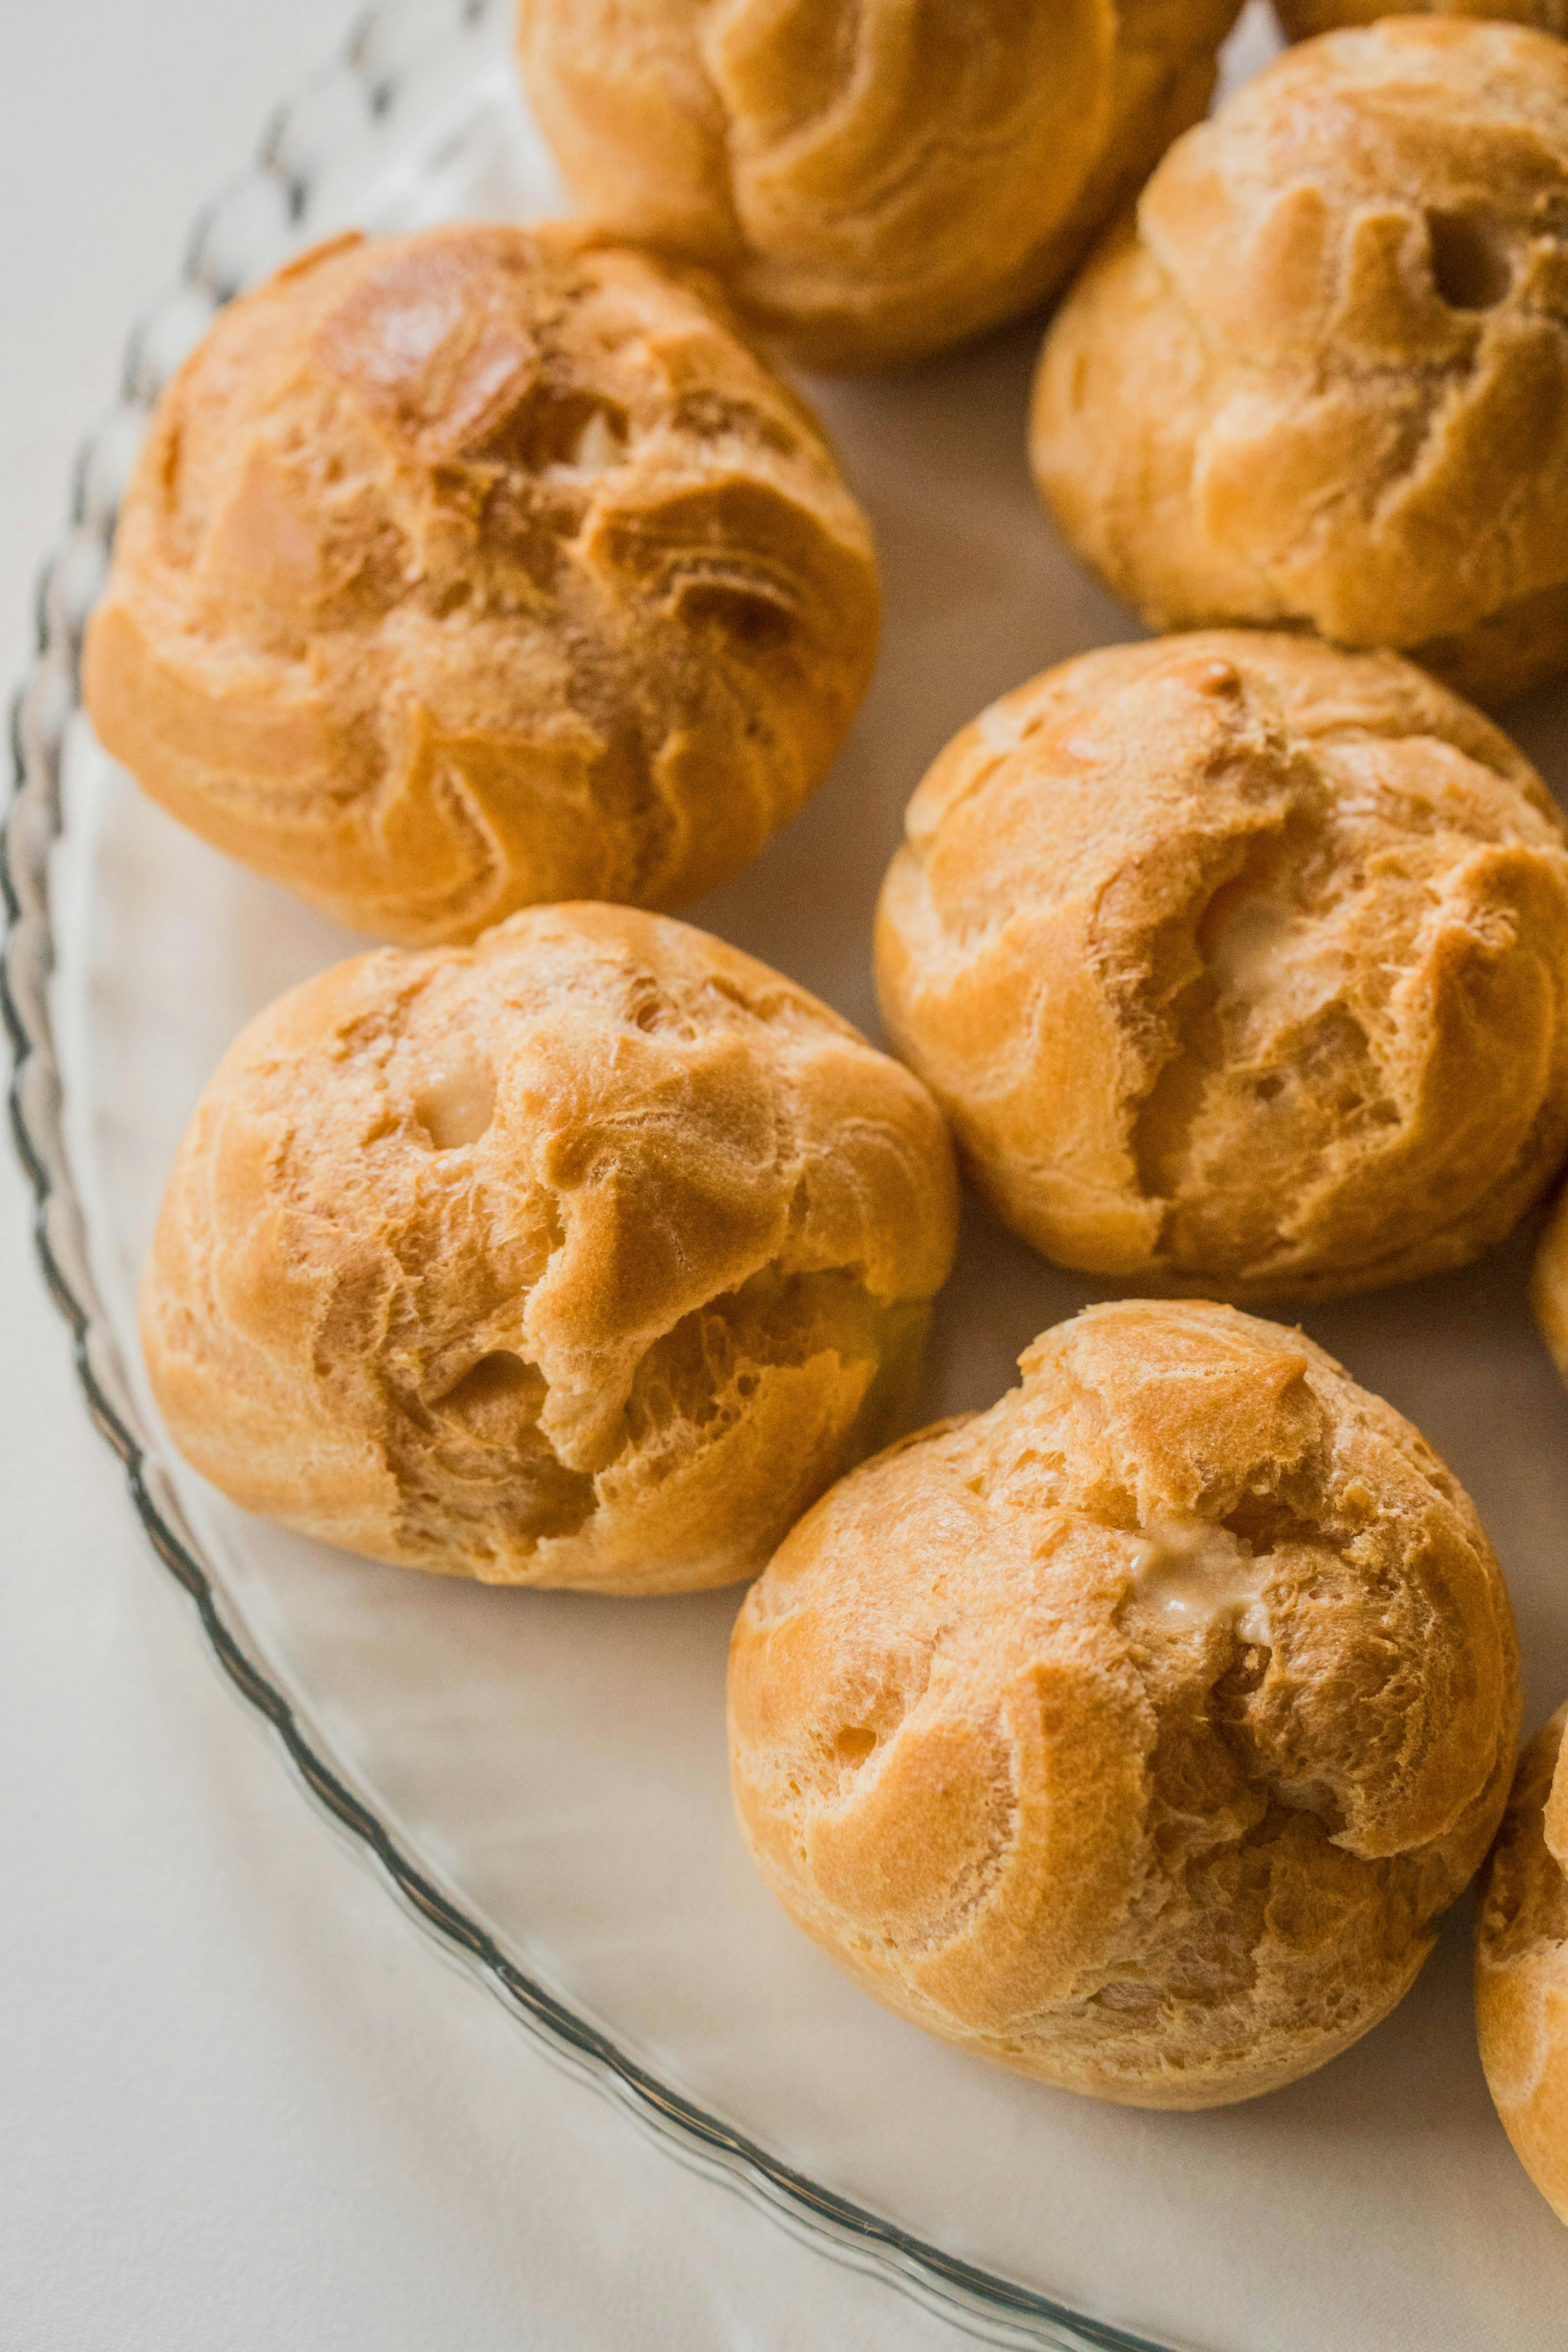 Baking With Yeast: Tips For Fluffy Bread And Rolls